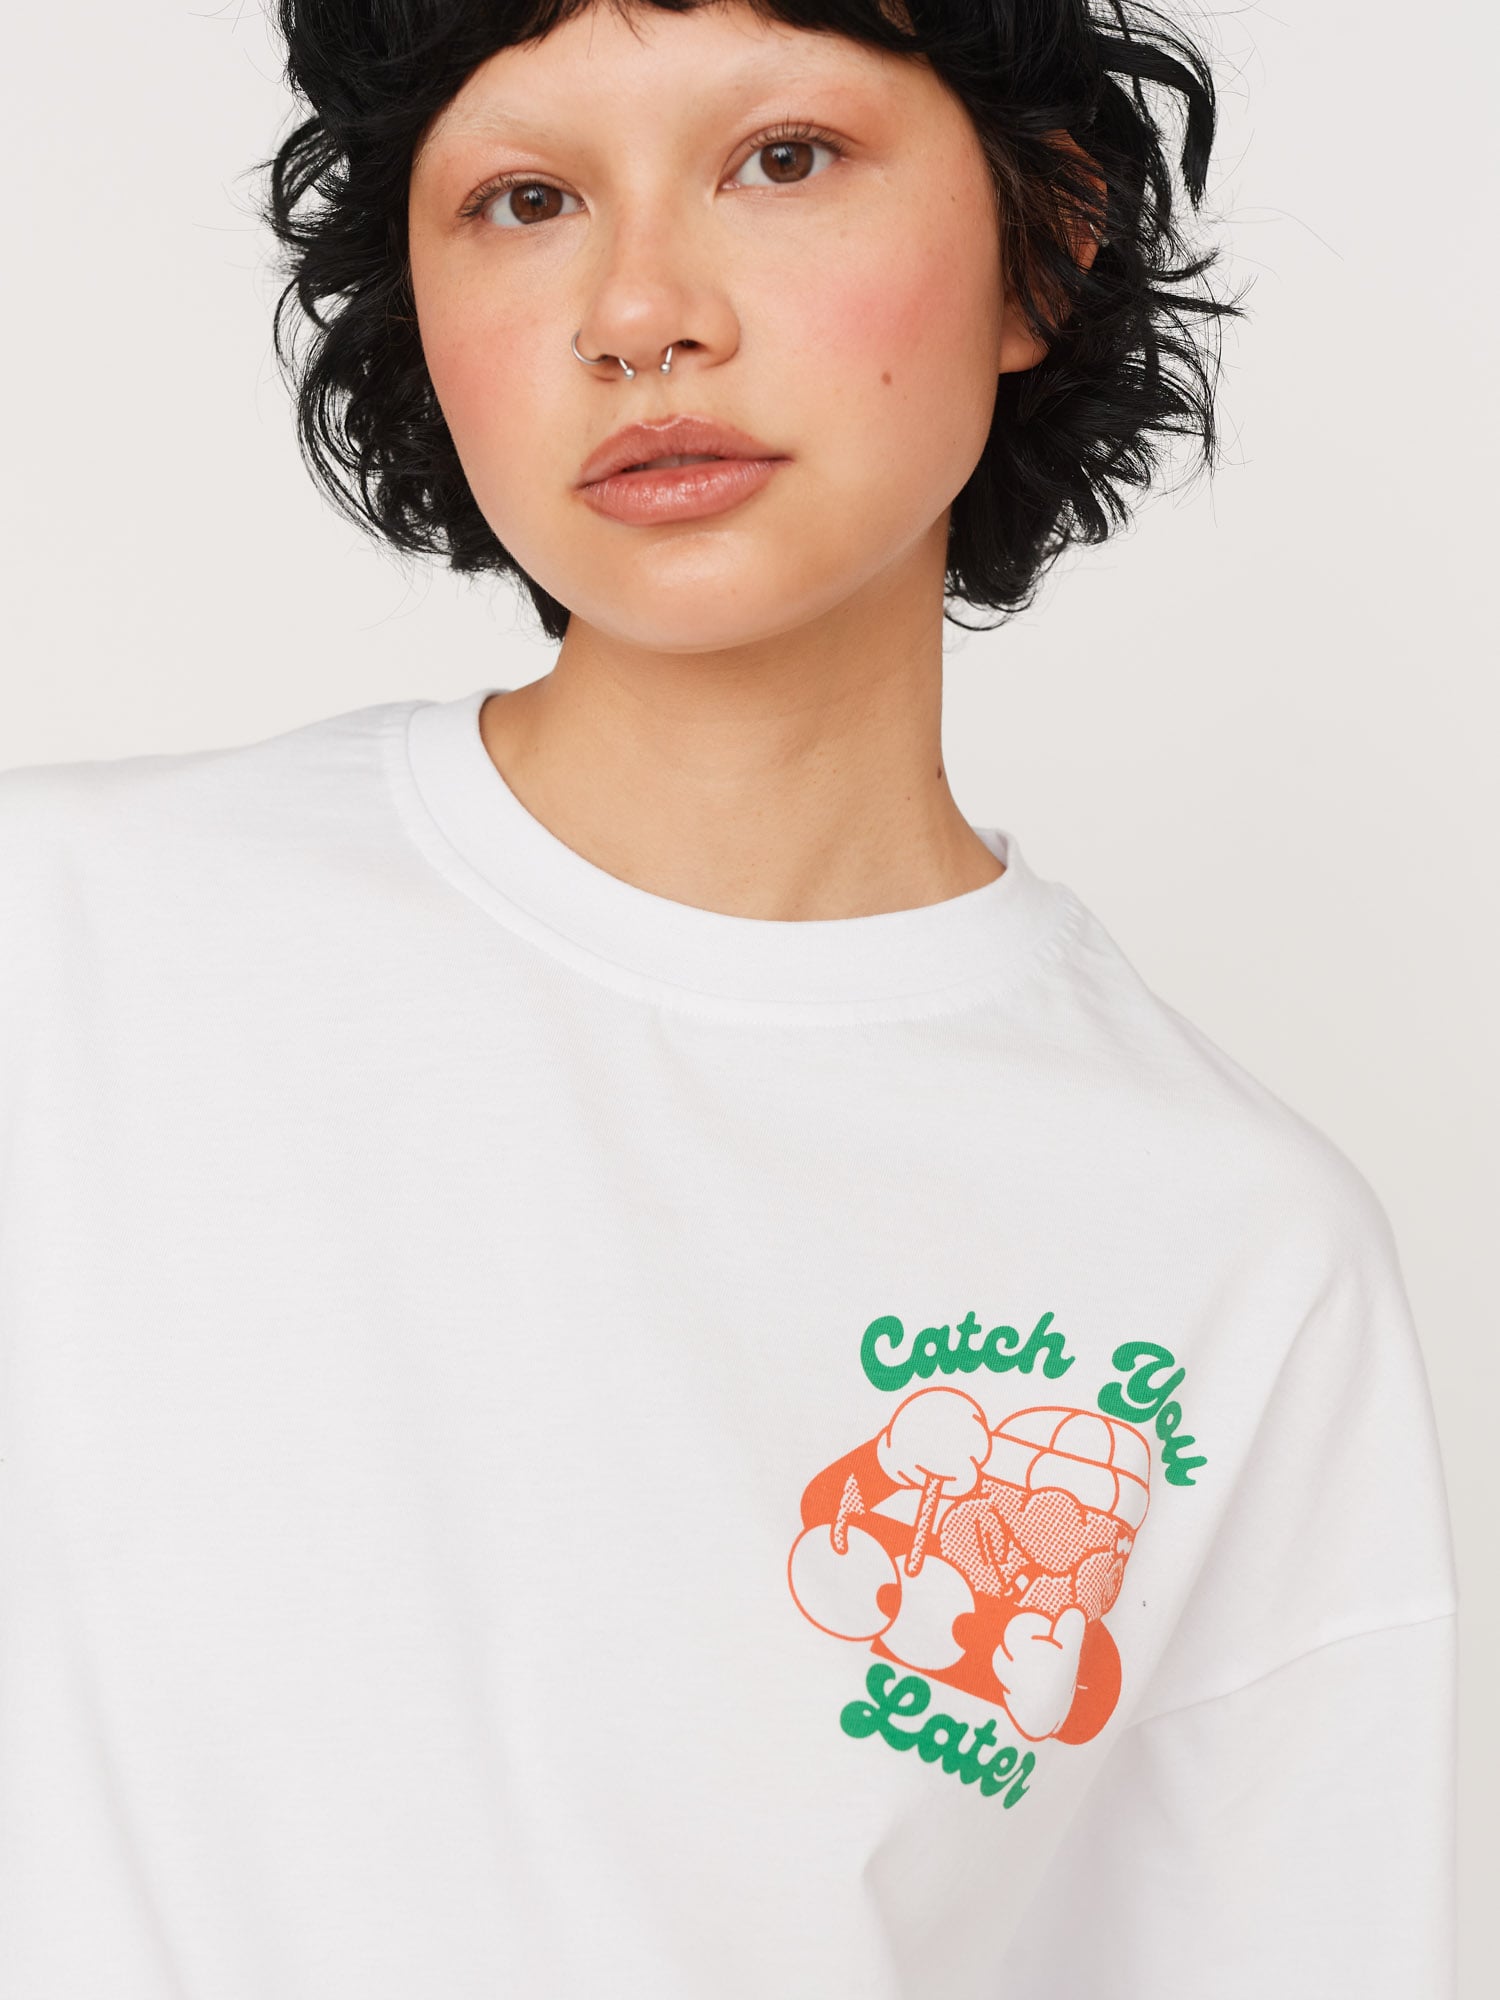 Women's Tops & T-Shirts | Ladies Tops | Graphic Tees | Lazy Oaf